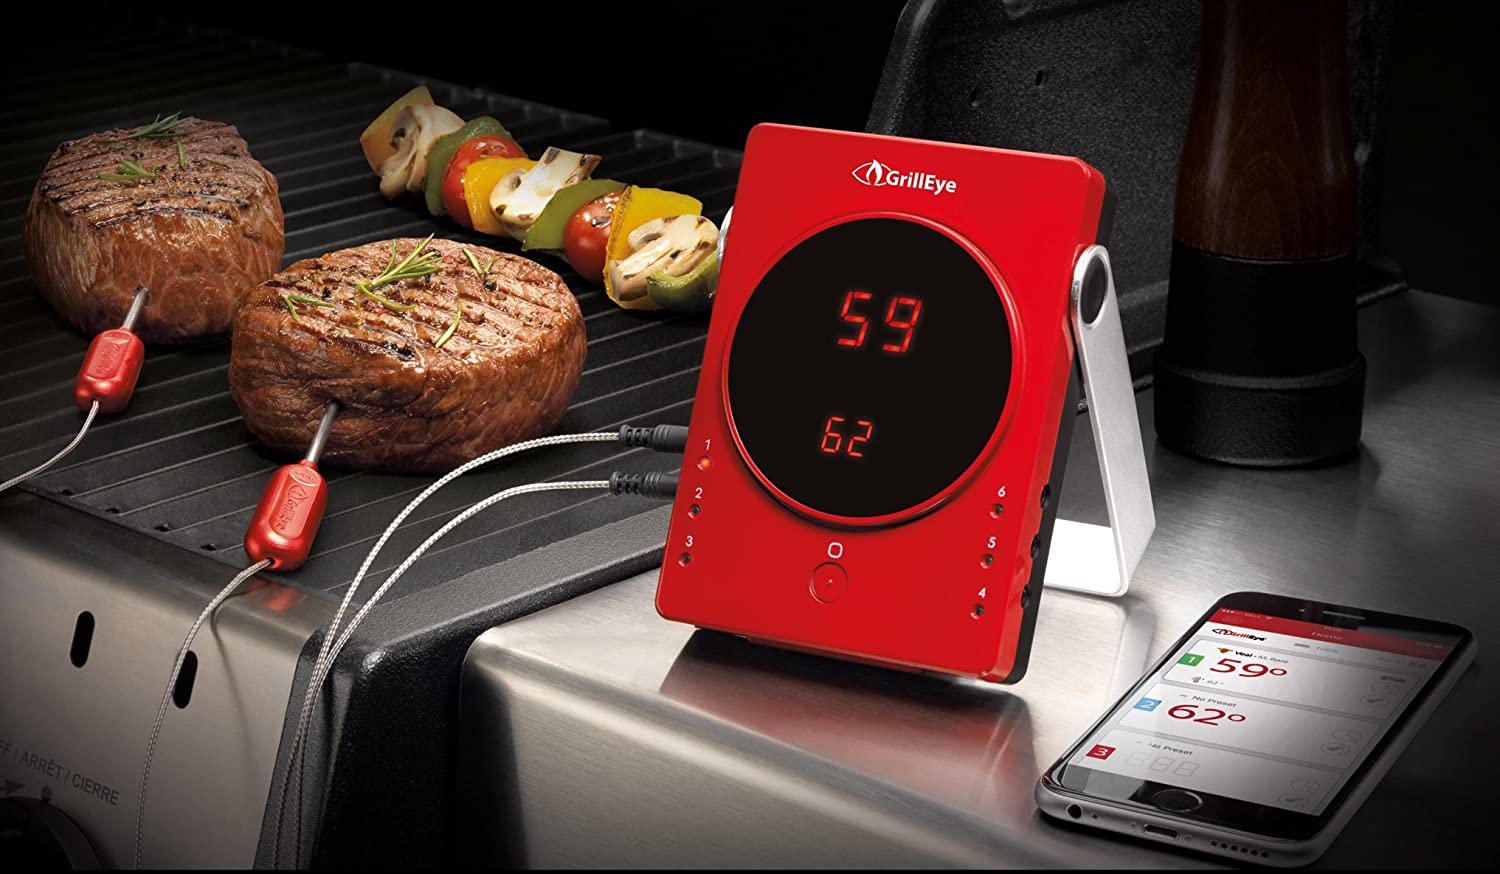 Original MEATER: Wireless Smart Meat Thermometer | 33ft Wireless Range |  for The Oven, Grill, BBQ, Kitchen | iOS & Android App | Apple Watch, Alexa